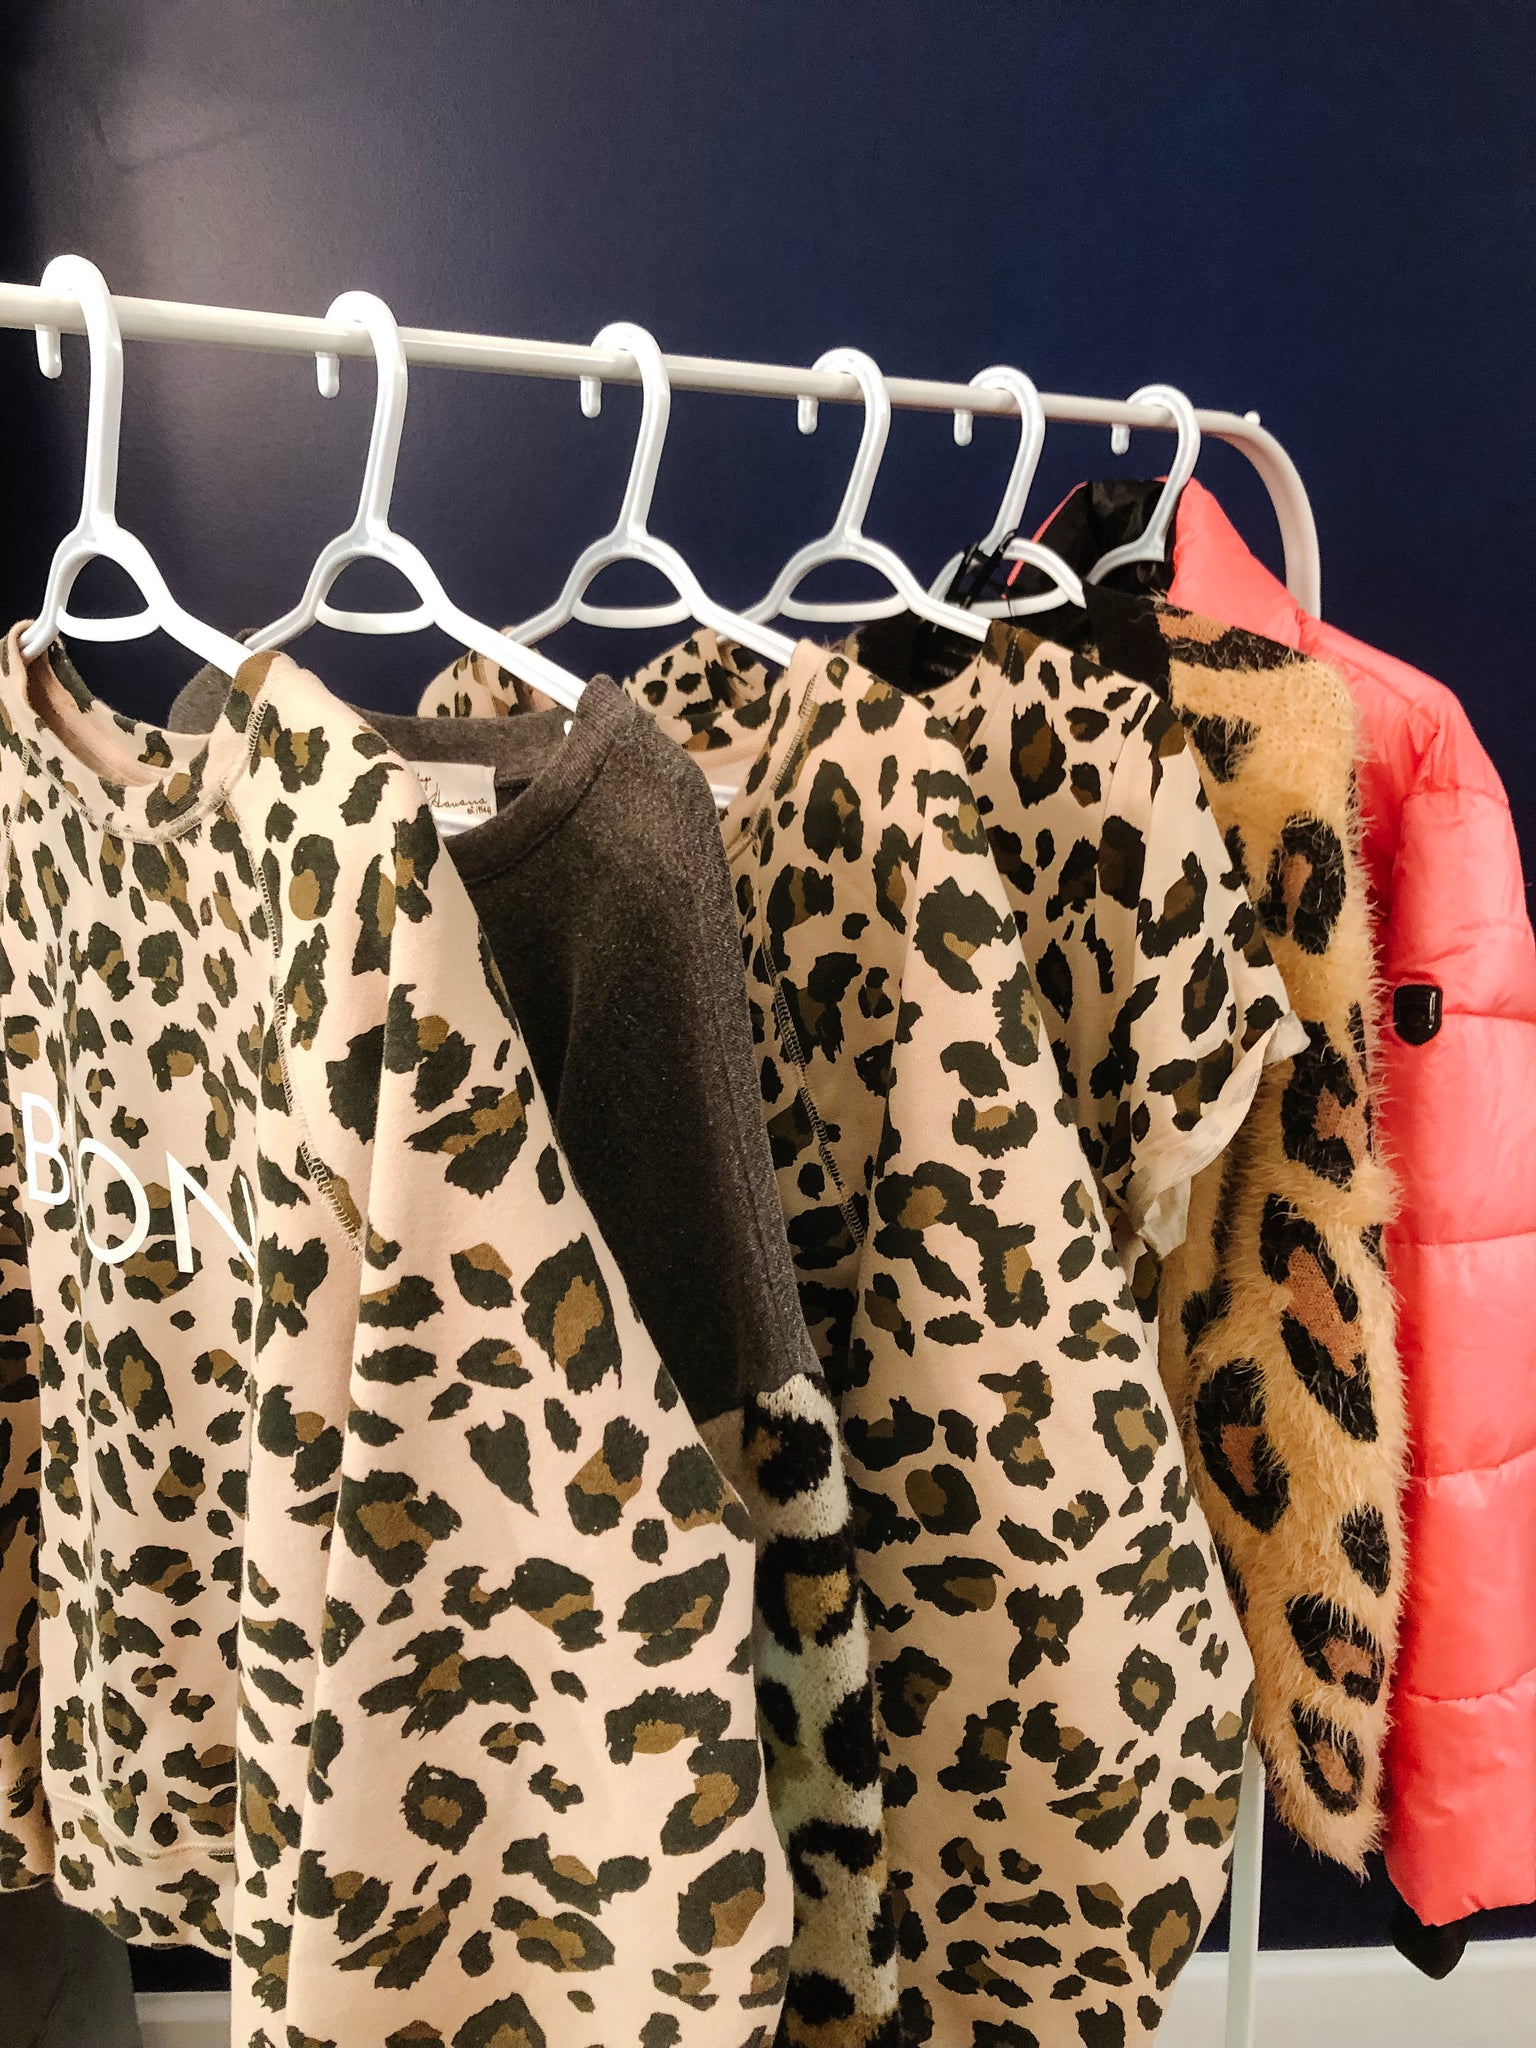 LEOPARD - the new neutral.